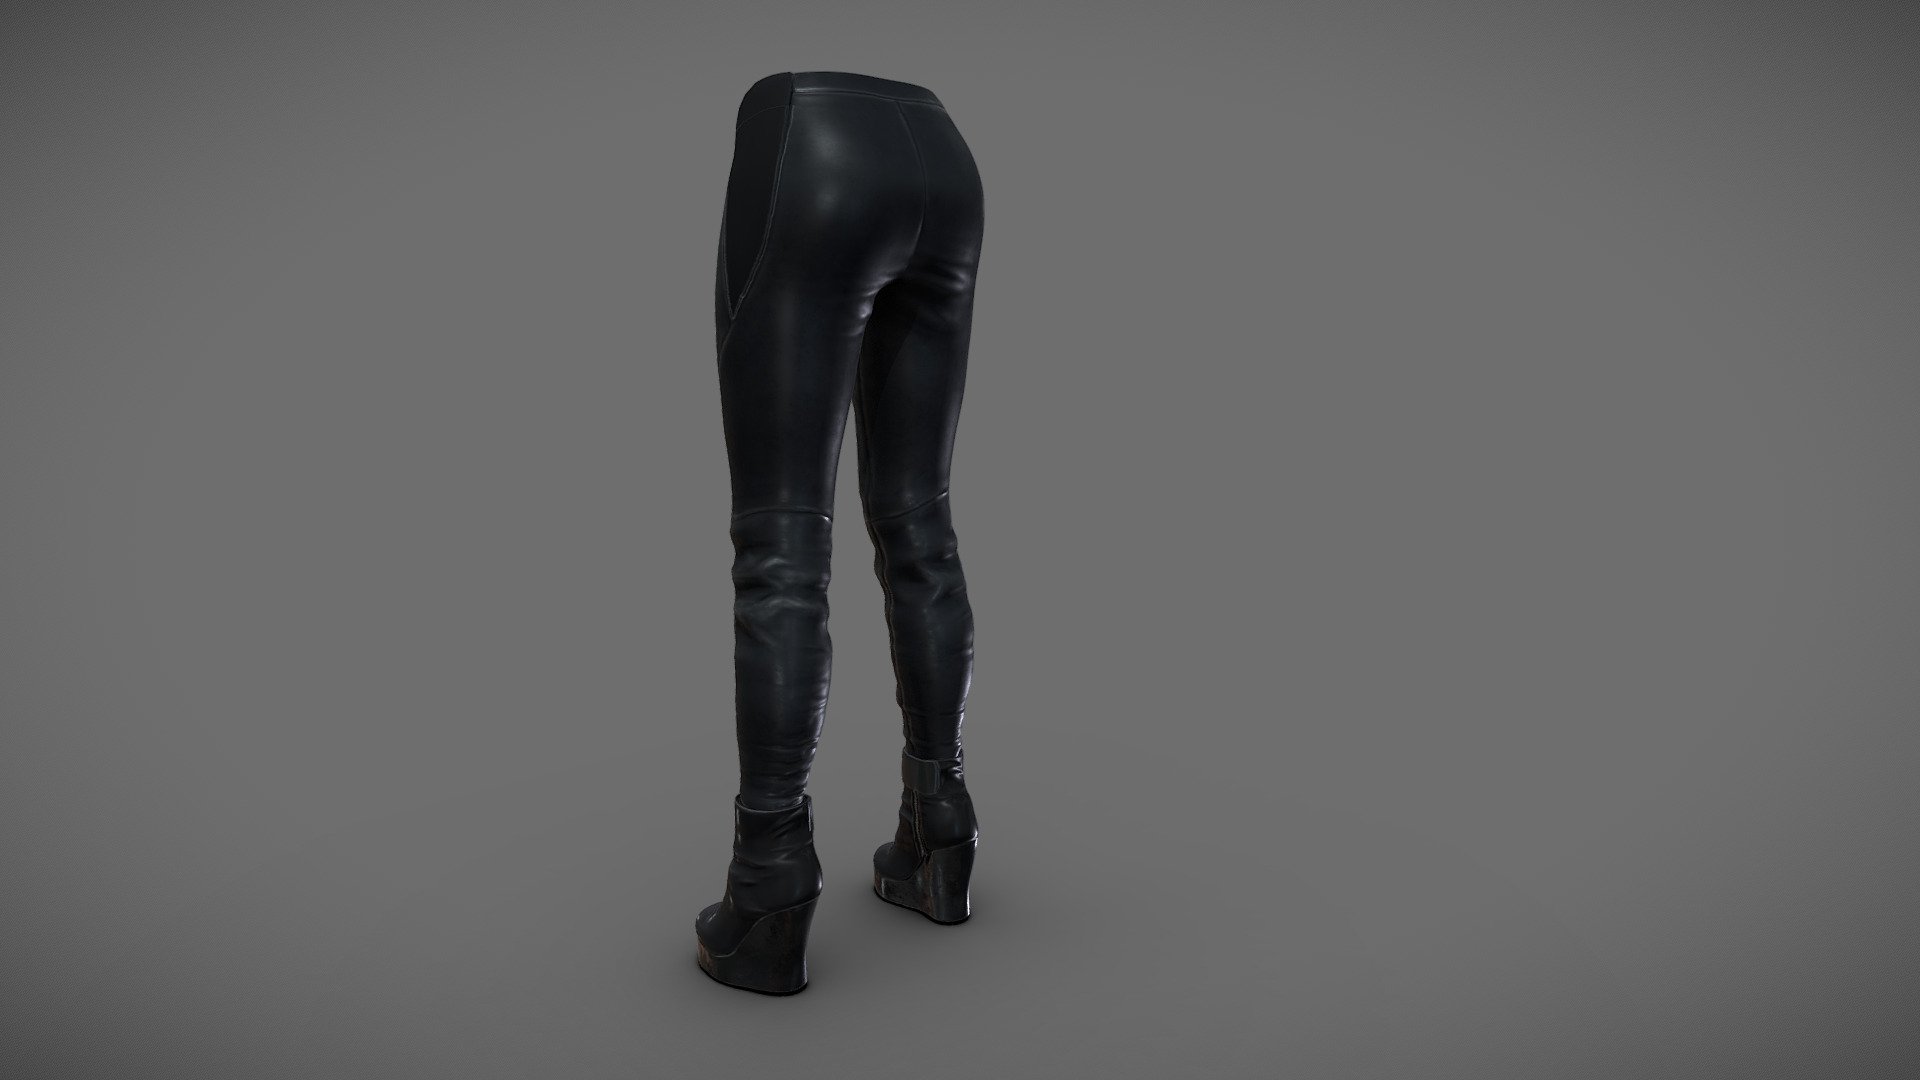 Pants + Boots

Can be fitted to any character

Clean topology

No overlapping smart optimum unwrapped UVs

High-quality realistic textures

FBX, OBJ, gITF, USDZ (request other formats)

PBR or Classic

Please ask any other questions.

Type     user:3dia &ldquo;search term